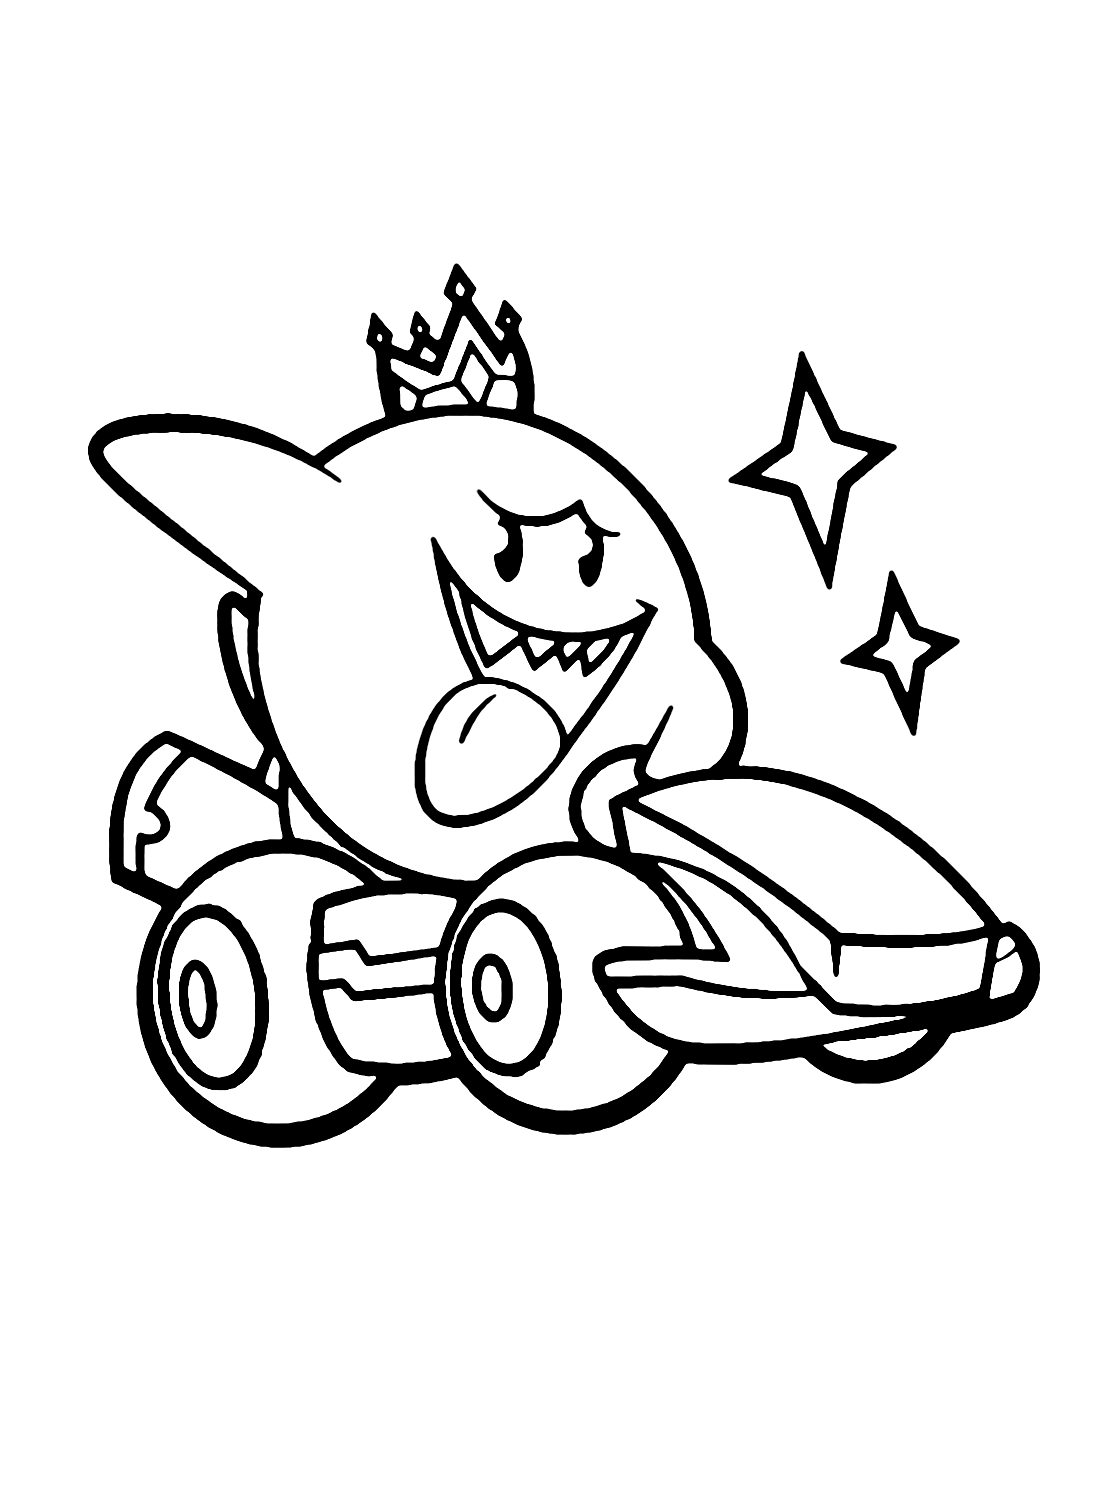 King Boo with Car Coloring Page